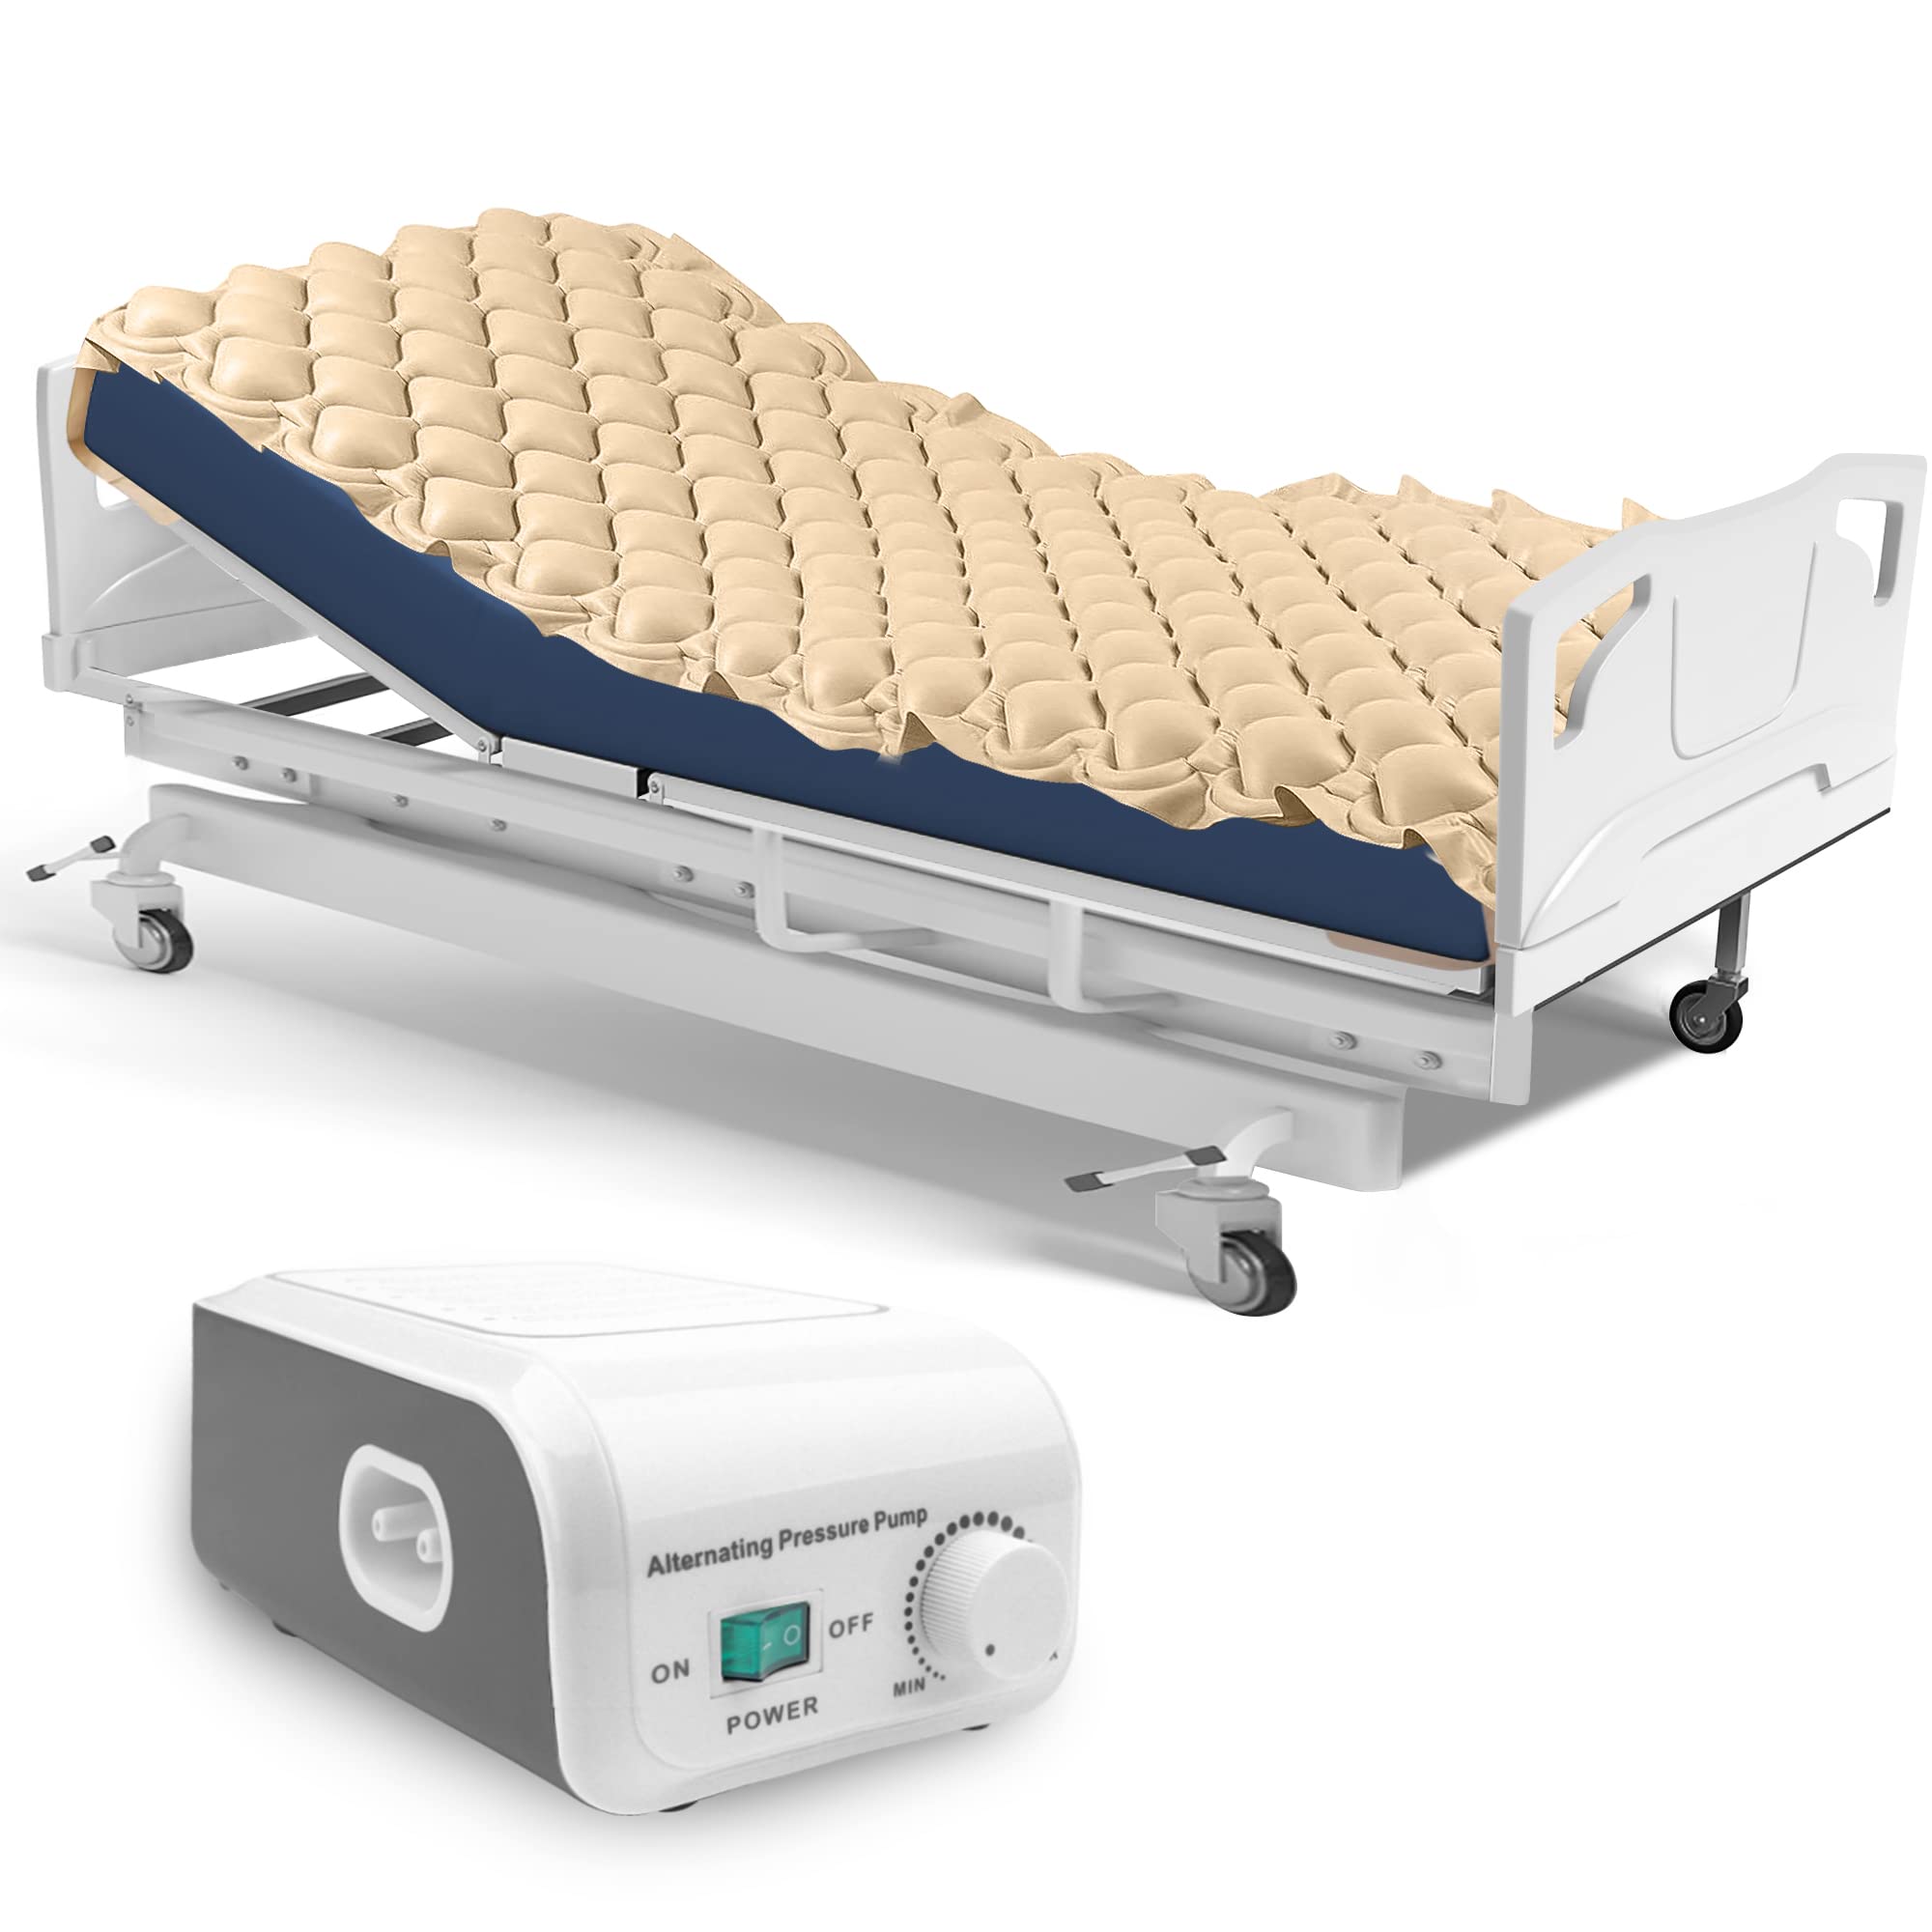 Kyltoor Alternating Pressure Mattress for Bed Sores, Bed Pad to Prevent Bed Sores for Hospital Bed Includes Inflatable Air Mattress and Quiet Pump, for Bed Sore Relief Pressure and Sores Treatment